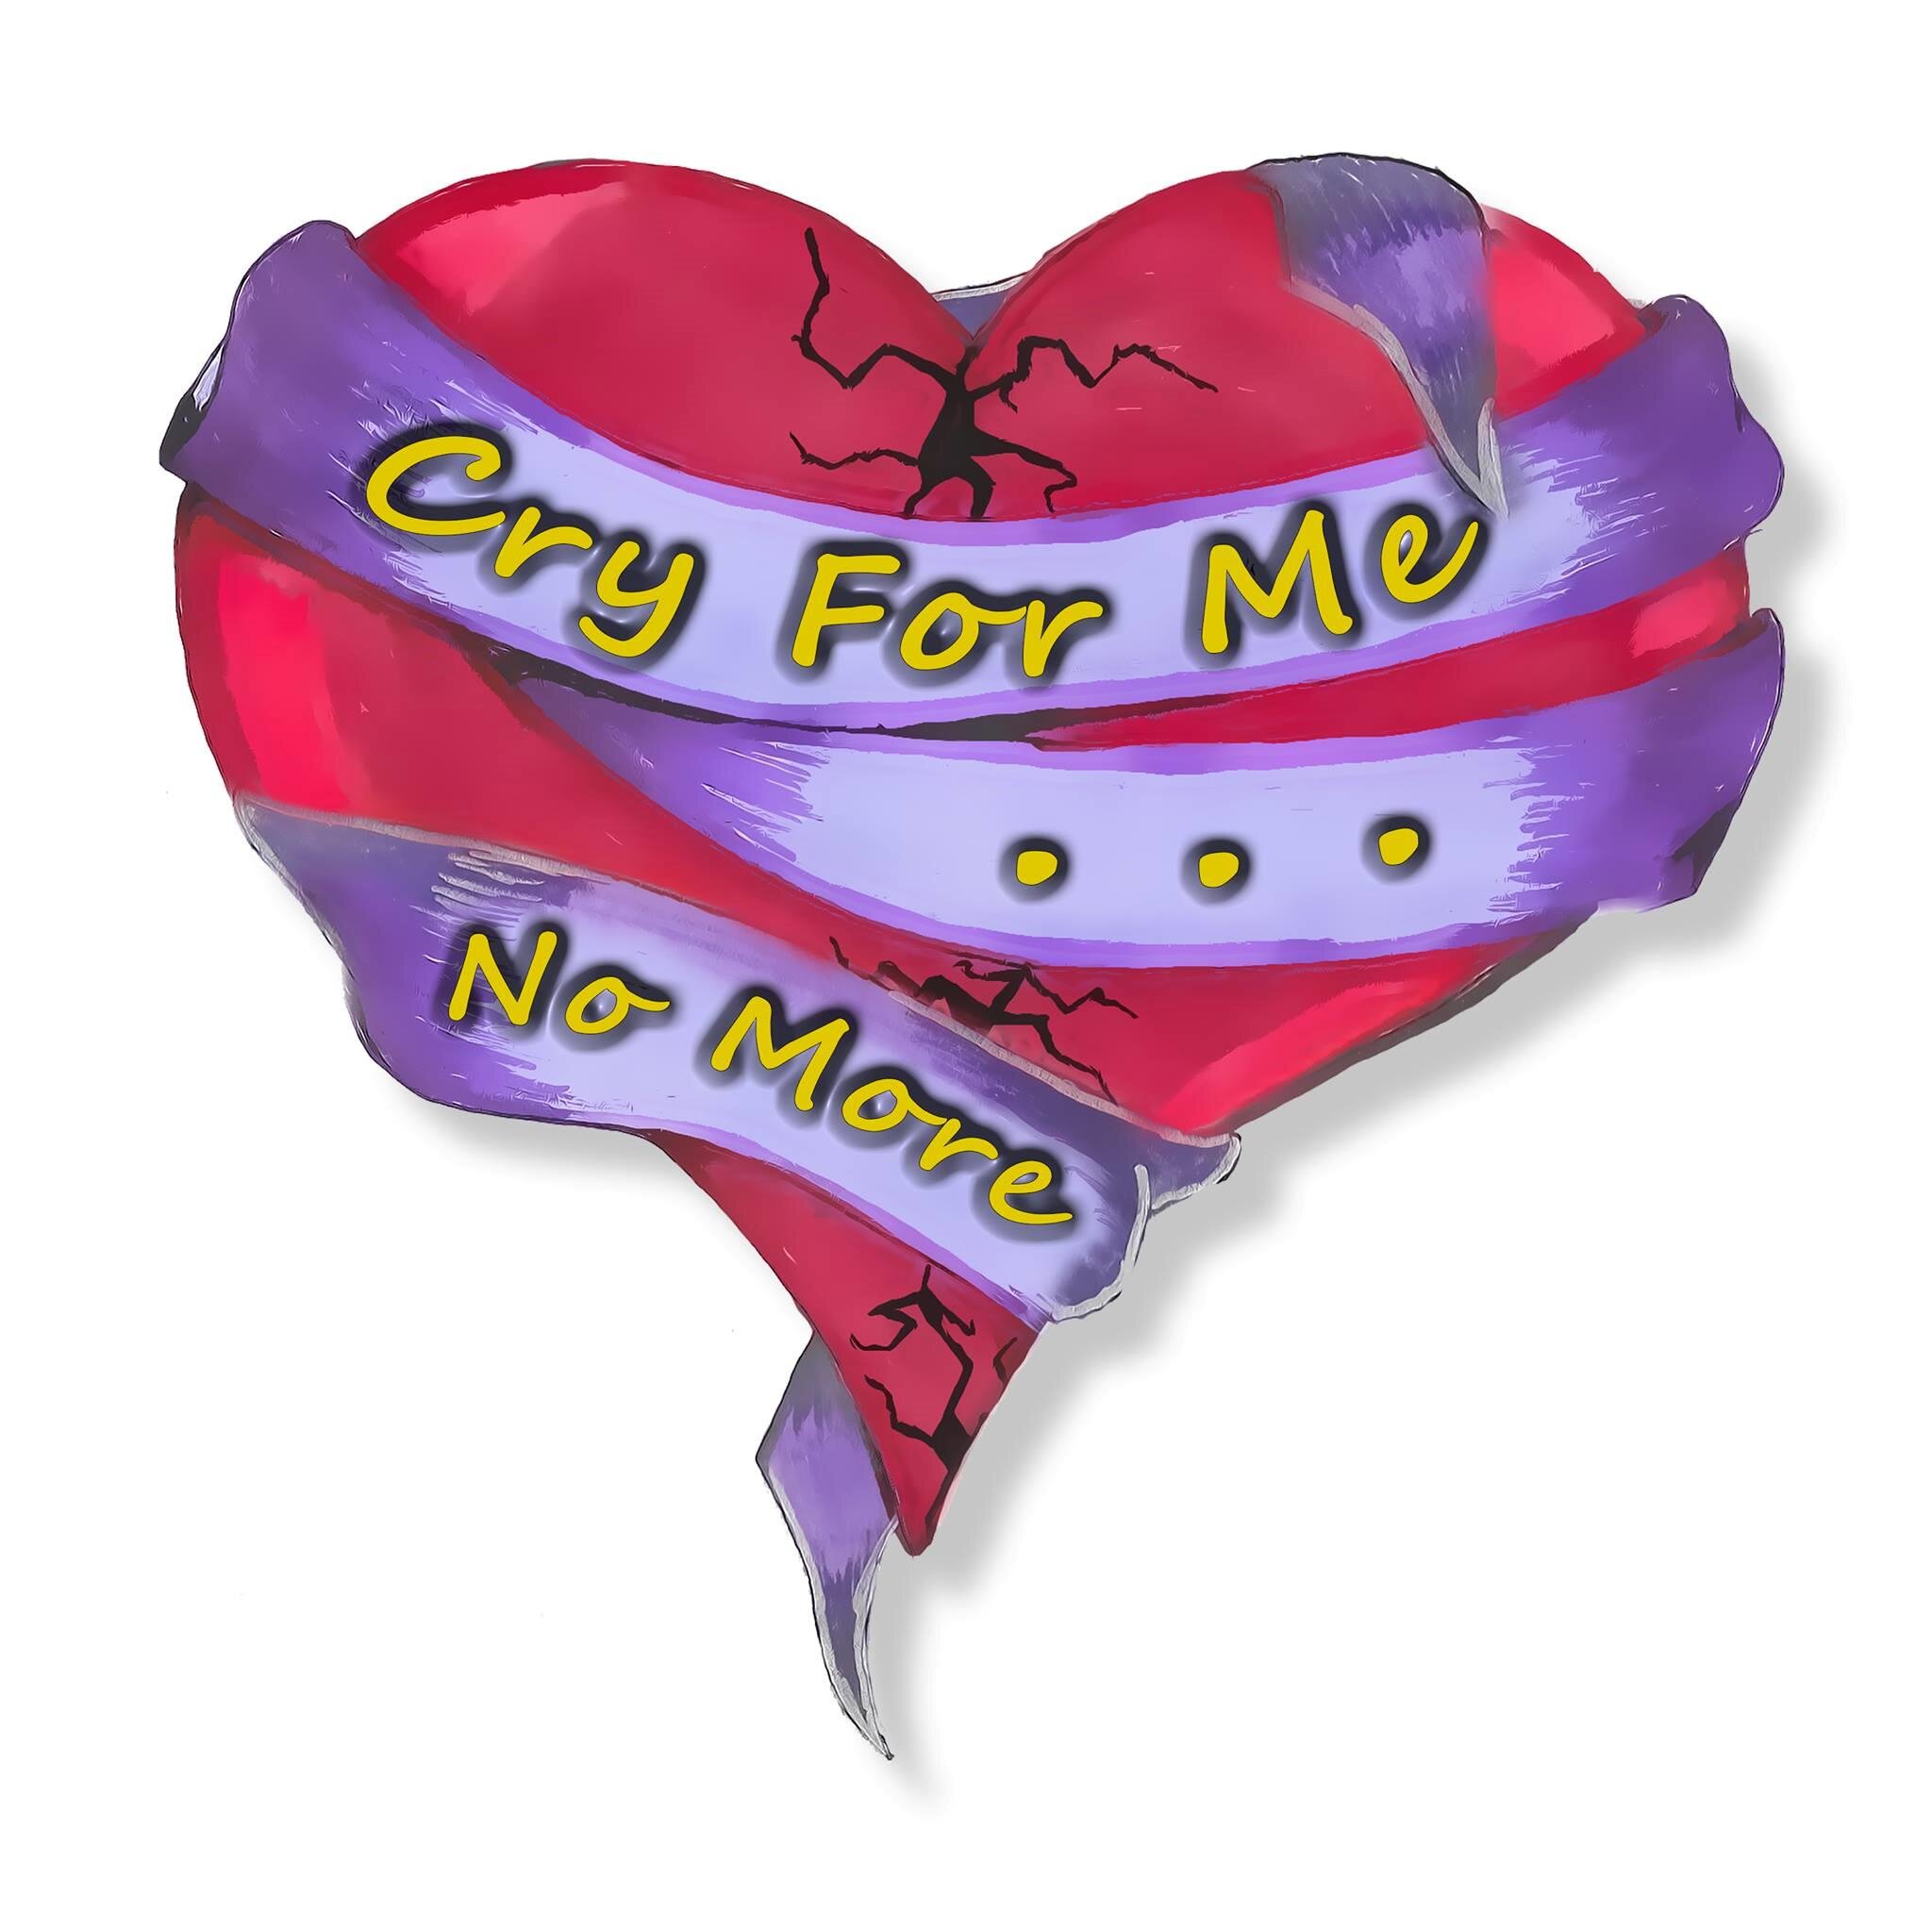 Cry For Me...No More is a program to assist families through the indescribable pain after the loss of a child. visit us at http://t.co/Qf1sfWkTIB to learn more.